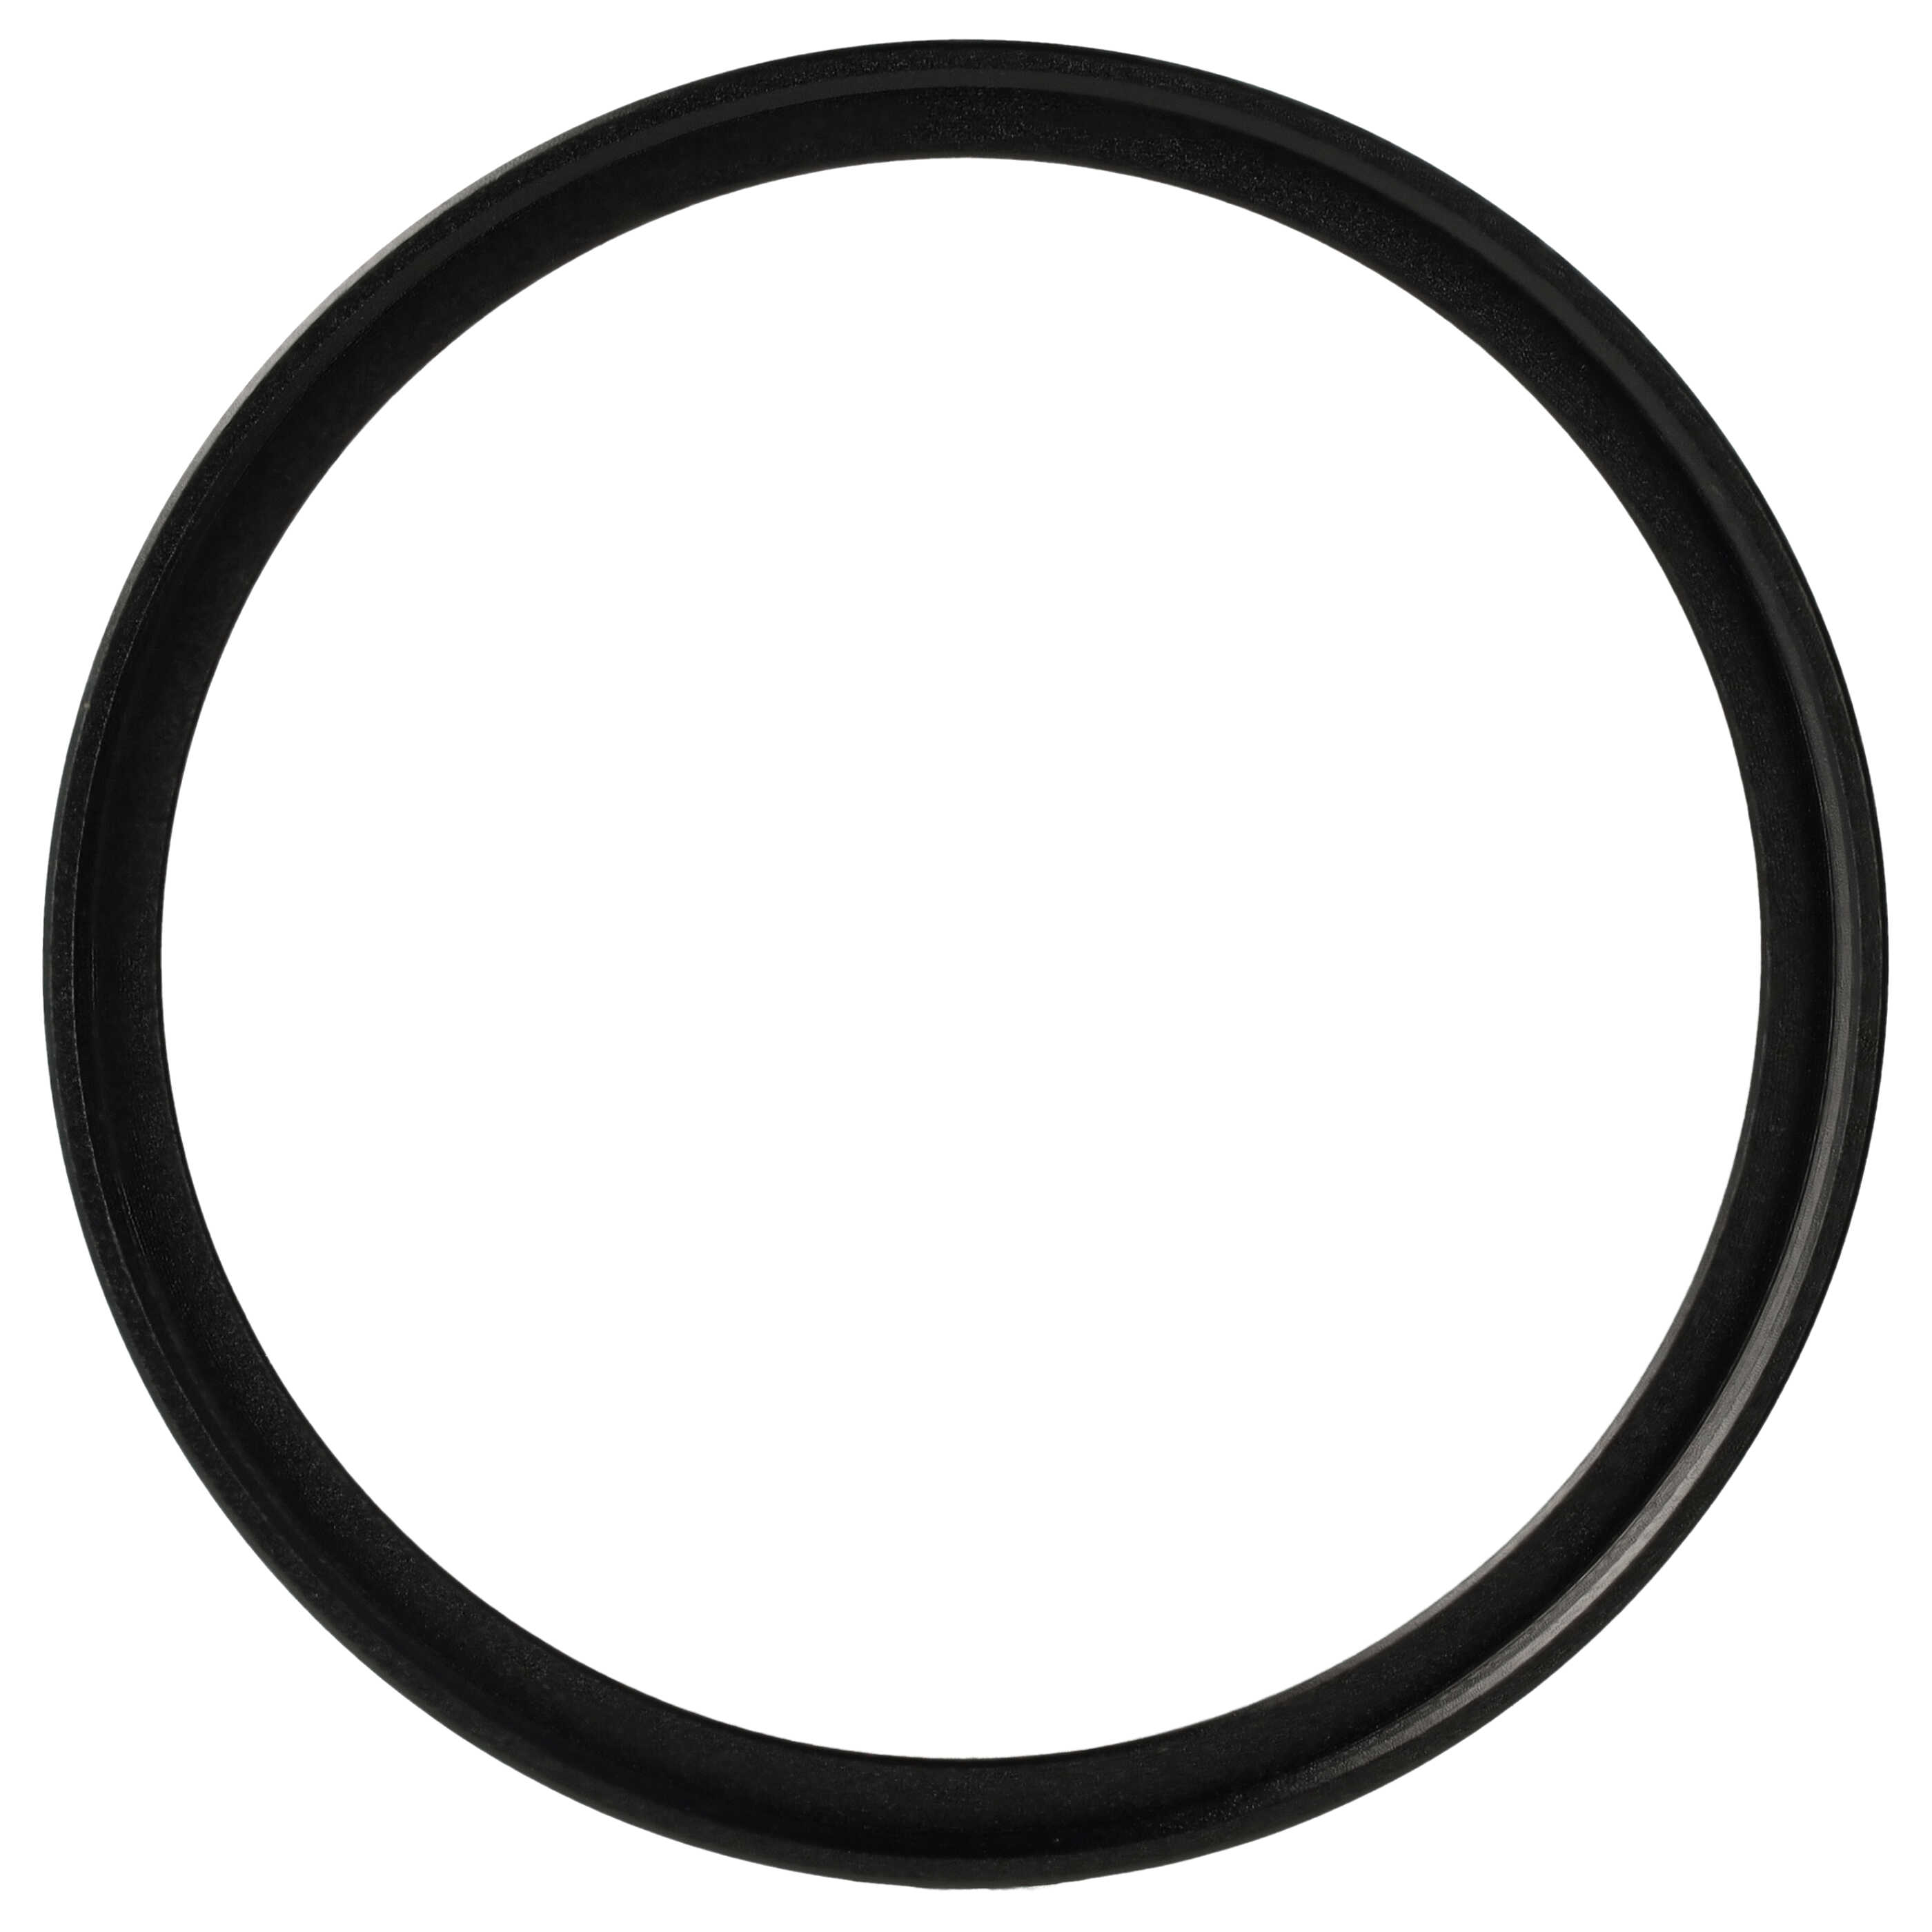 Step-Up Ring Adapter of 55 mm to 58 mmfor various Camera Lens - Filter Adapter